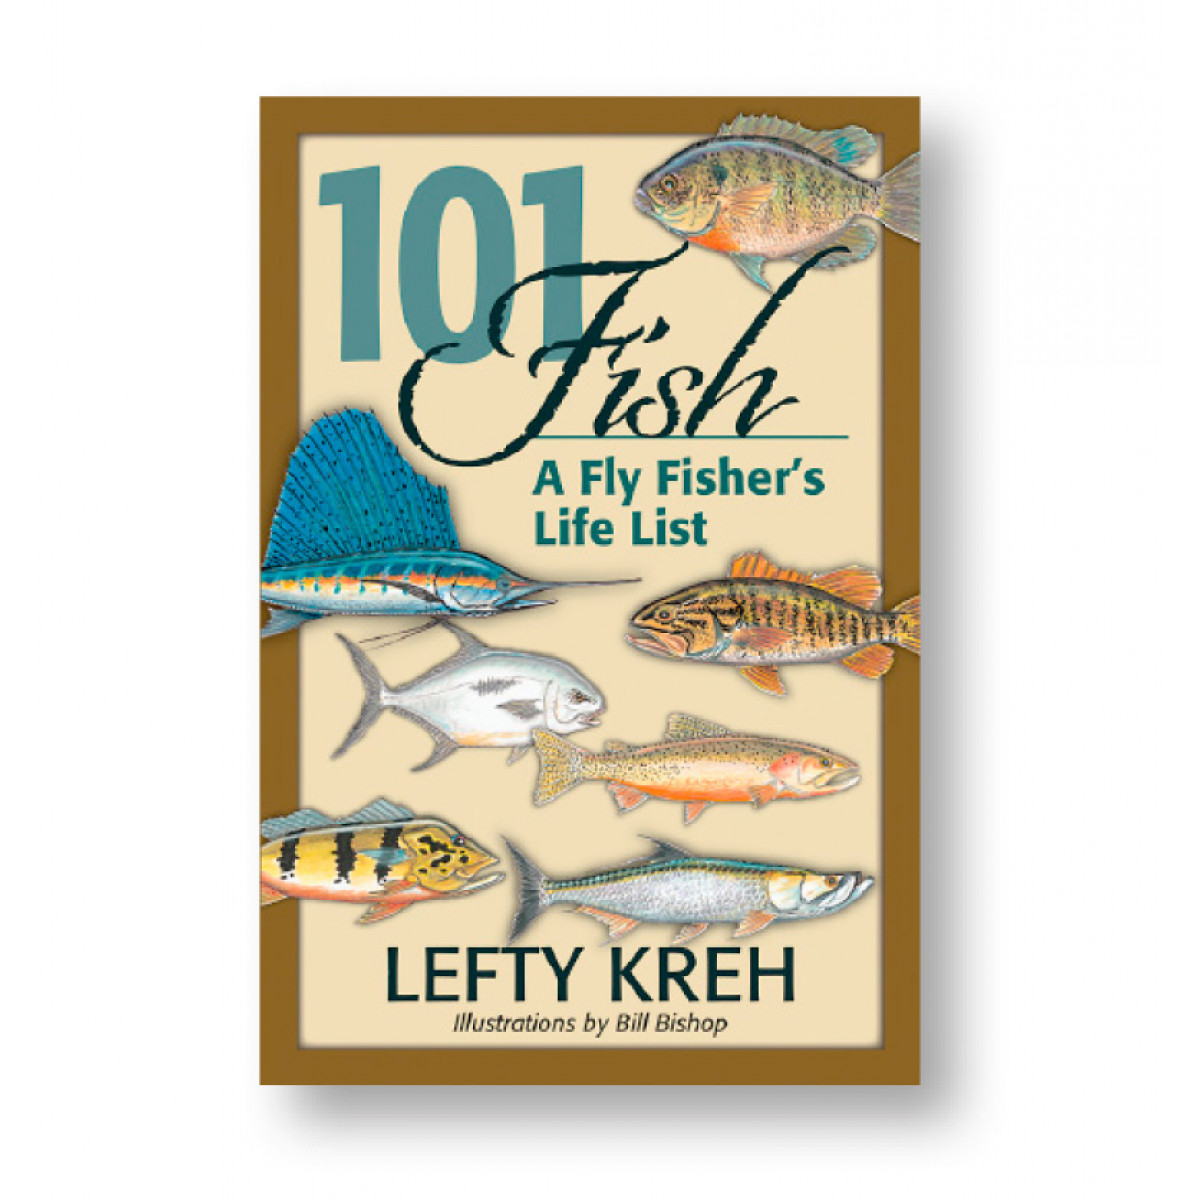 101 Fish: A Fly Fishers Life List